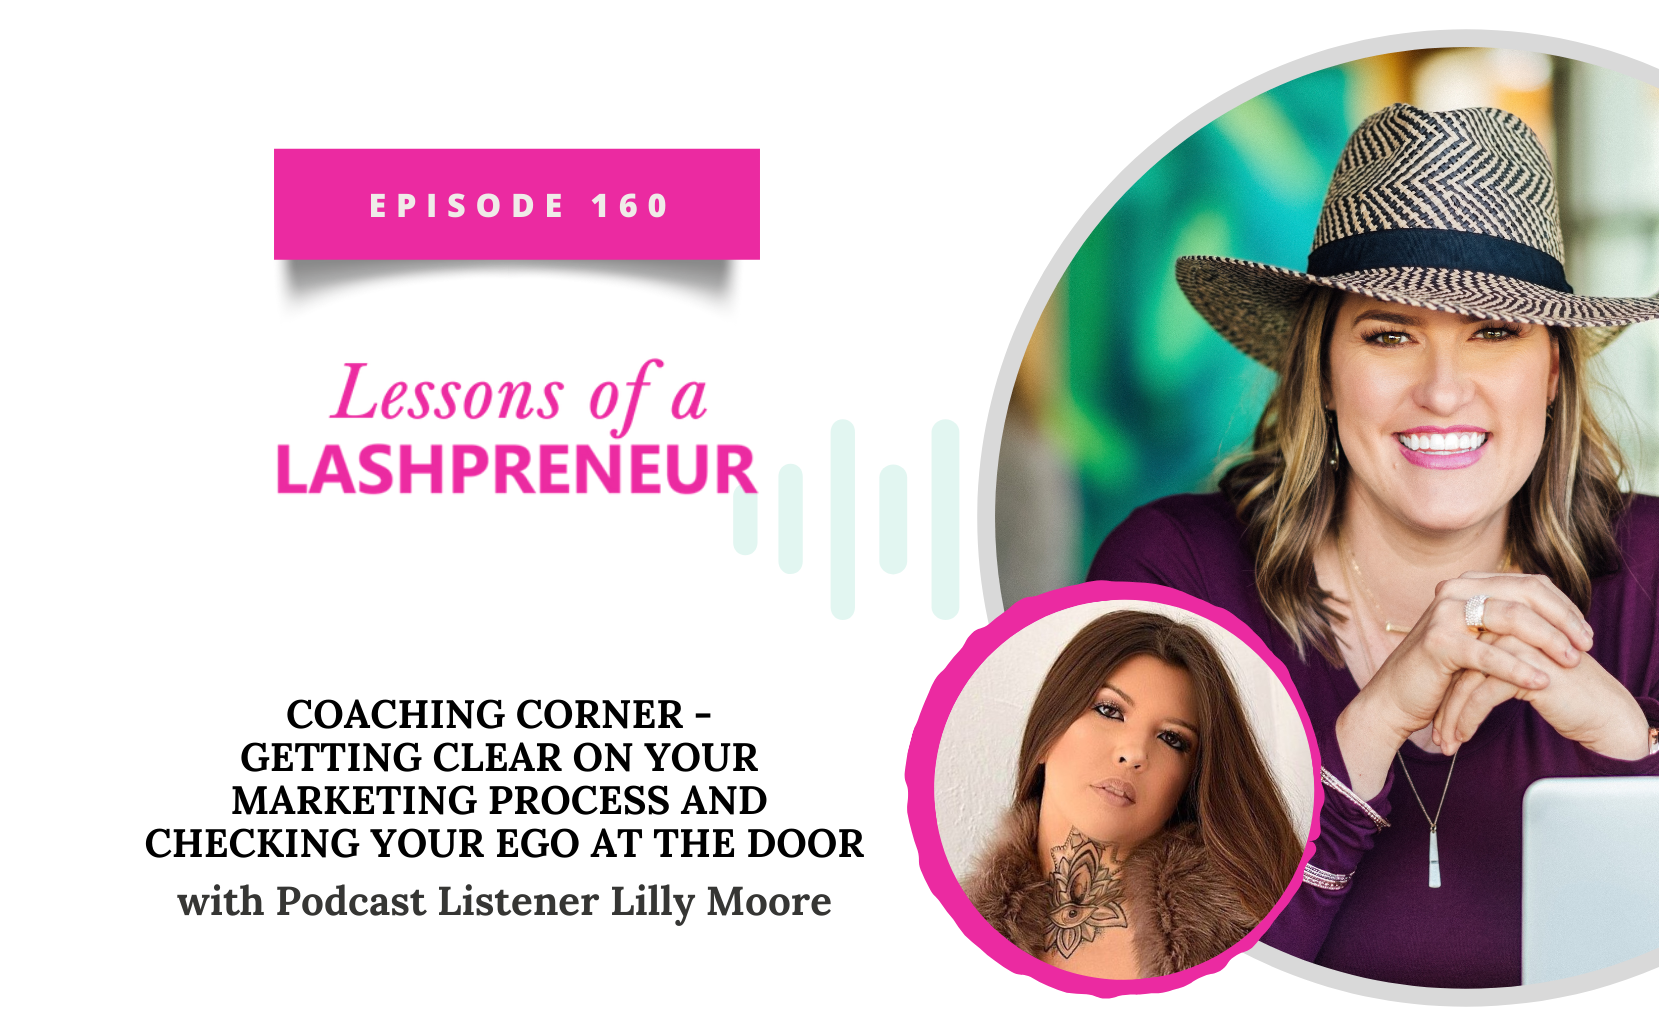 Coaching Corner – Getting Clear on your Marketing Process and Checking Your Ego at the Door with Podcast Listener Lilly Moore